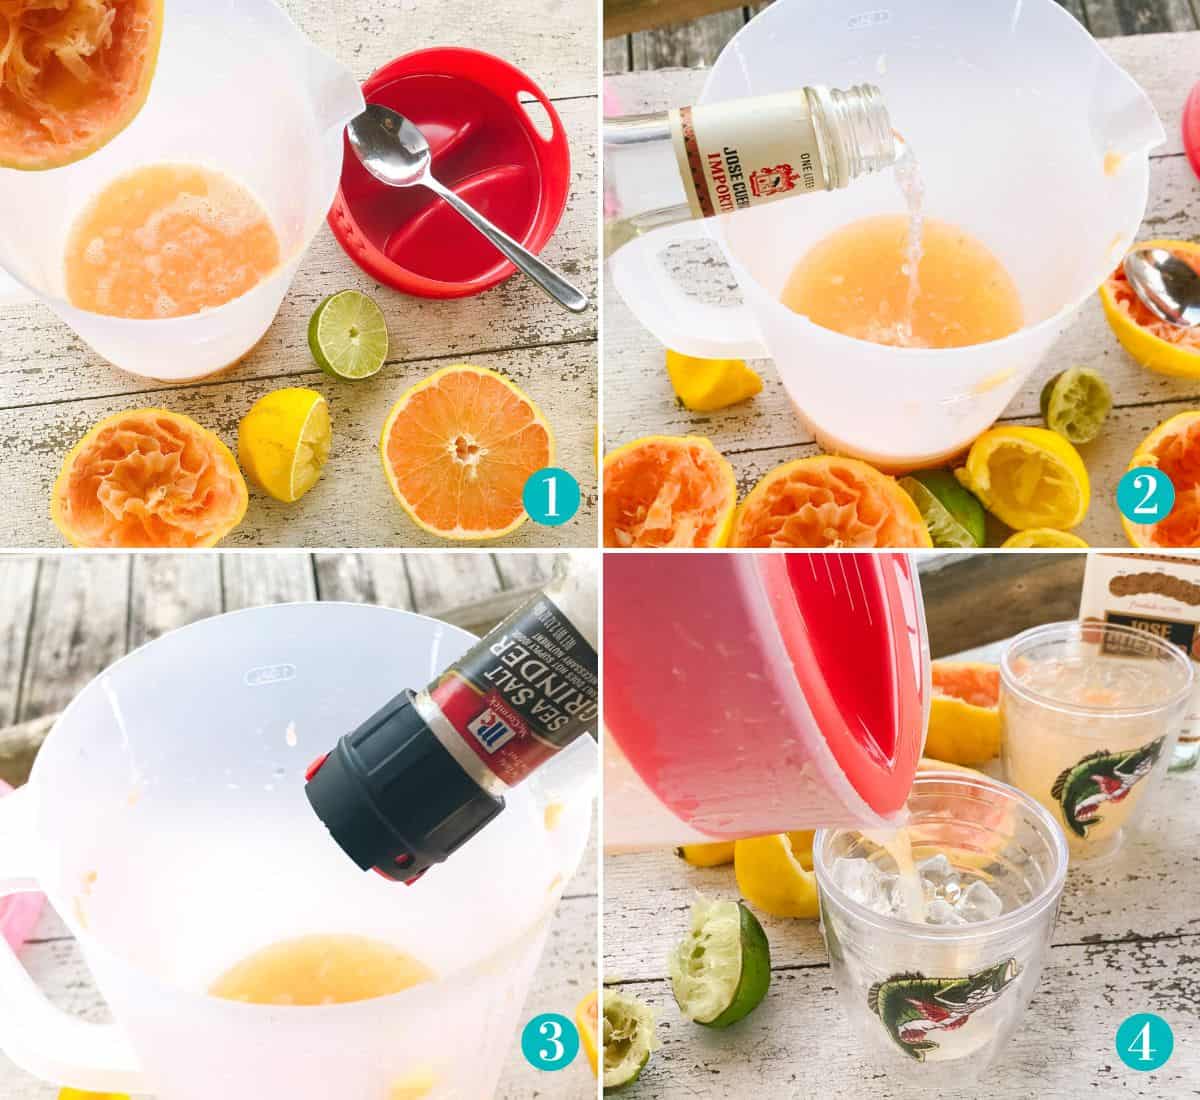 freshly squeezed grapefruit juice in a pitcher next to lemons and limes, tequila pouring into the pitcher with citrus juice, salt being added to the pitcher, and the pitcher of margaritas being poured in a glass with ice.